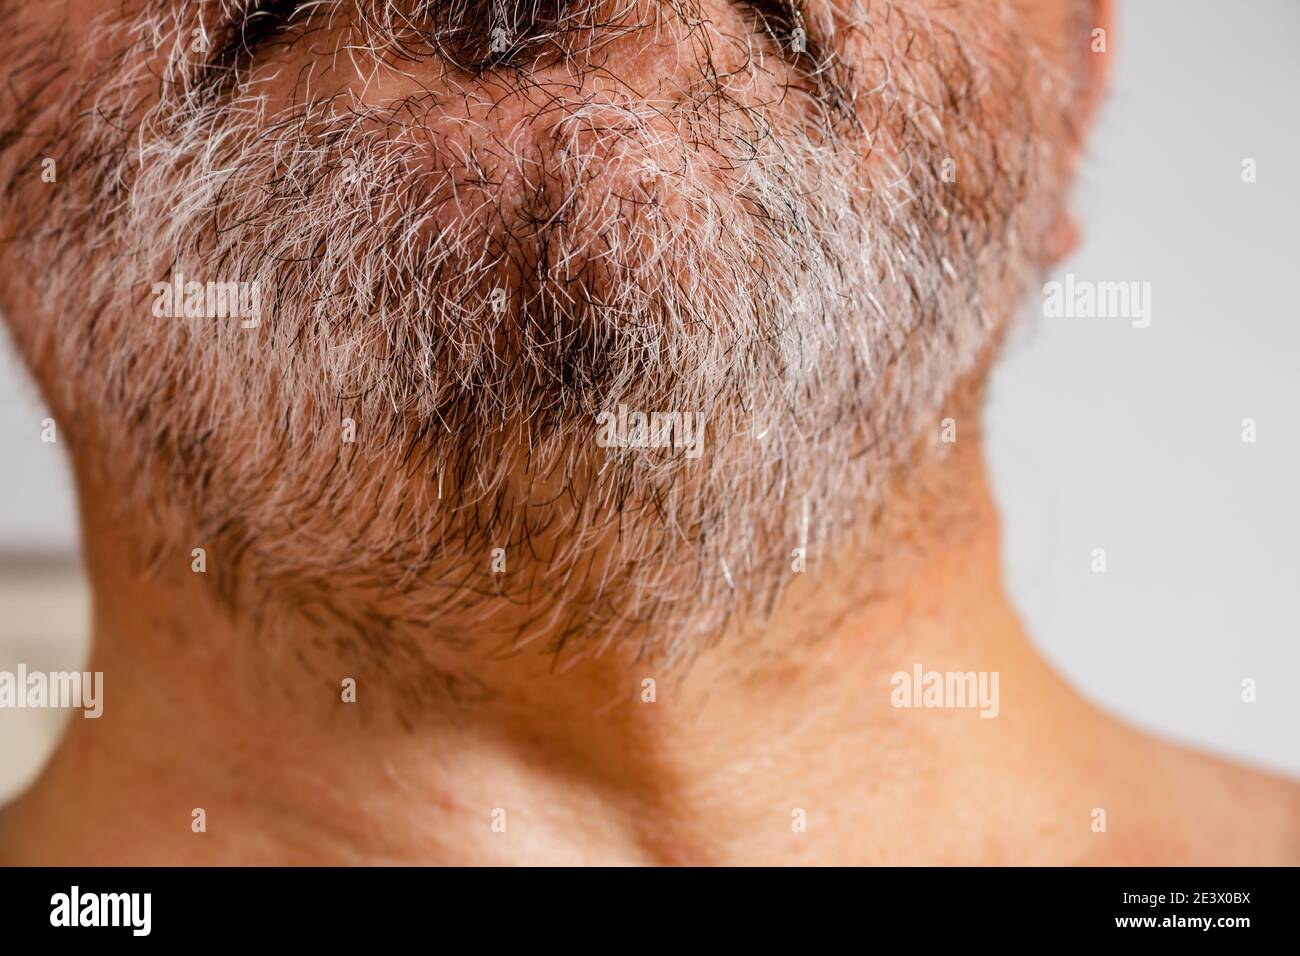 Stunted white, gray and black beard of a middle-aged man. Background white. Stock Photo